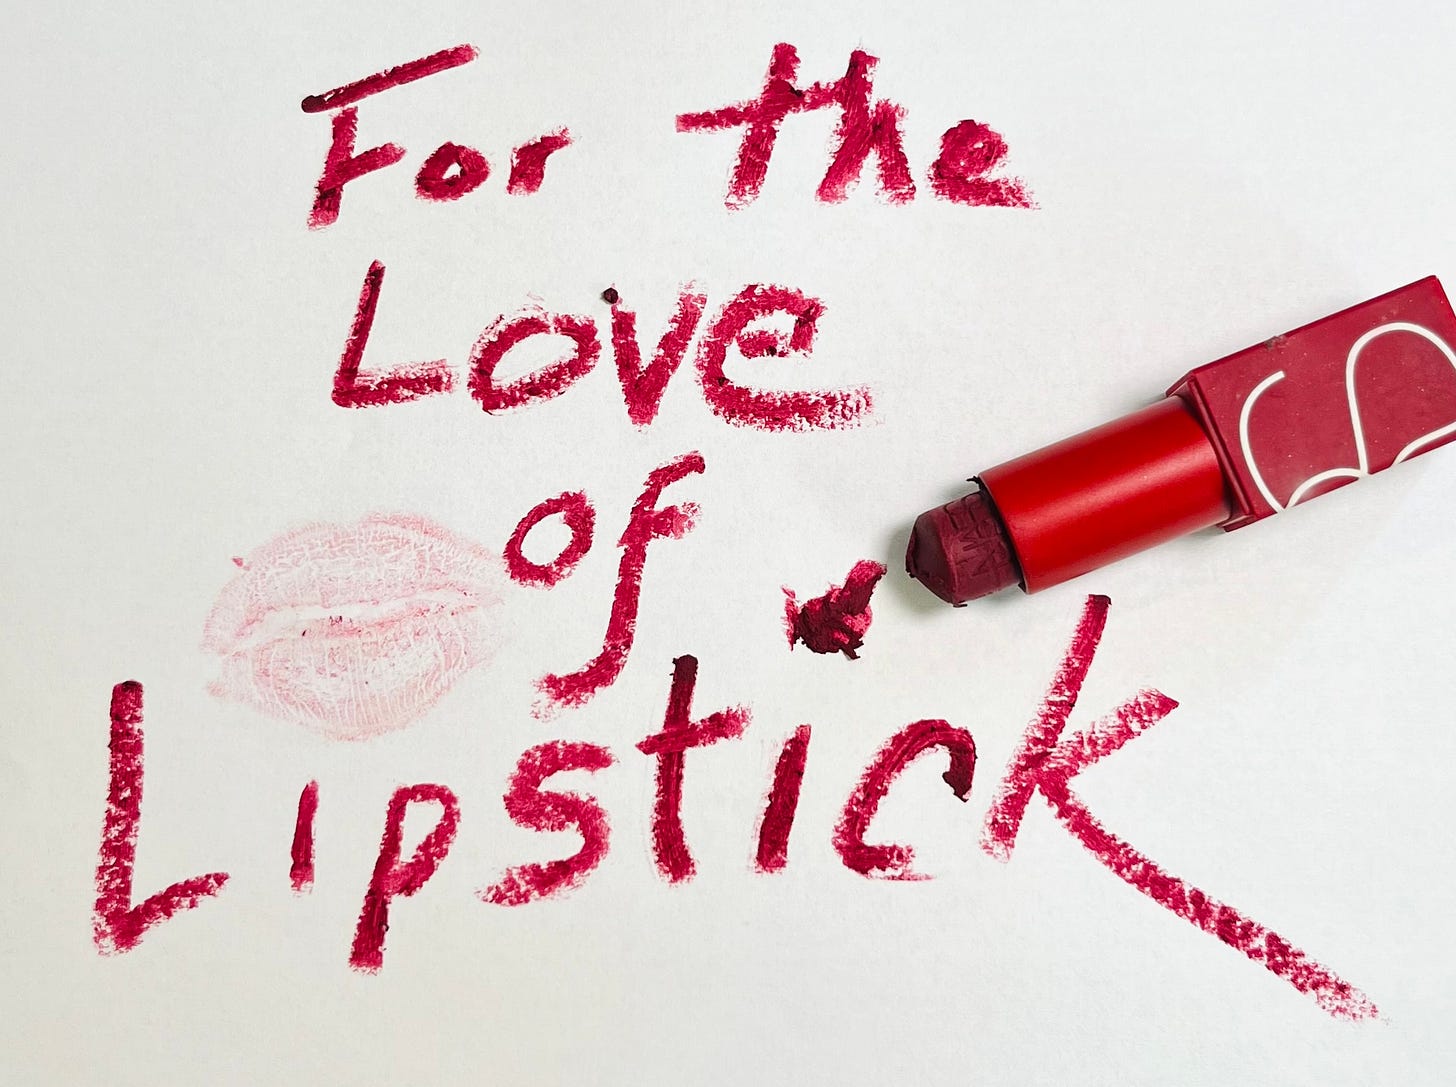 “For the Love of Lipstick” is written in lipstick on a piece of white paper. There is a lipstick kiss mark on the paper and the lipstick tube used to write the message rests on the paper as well. 